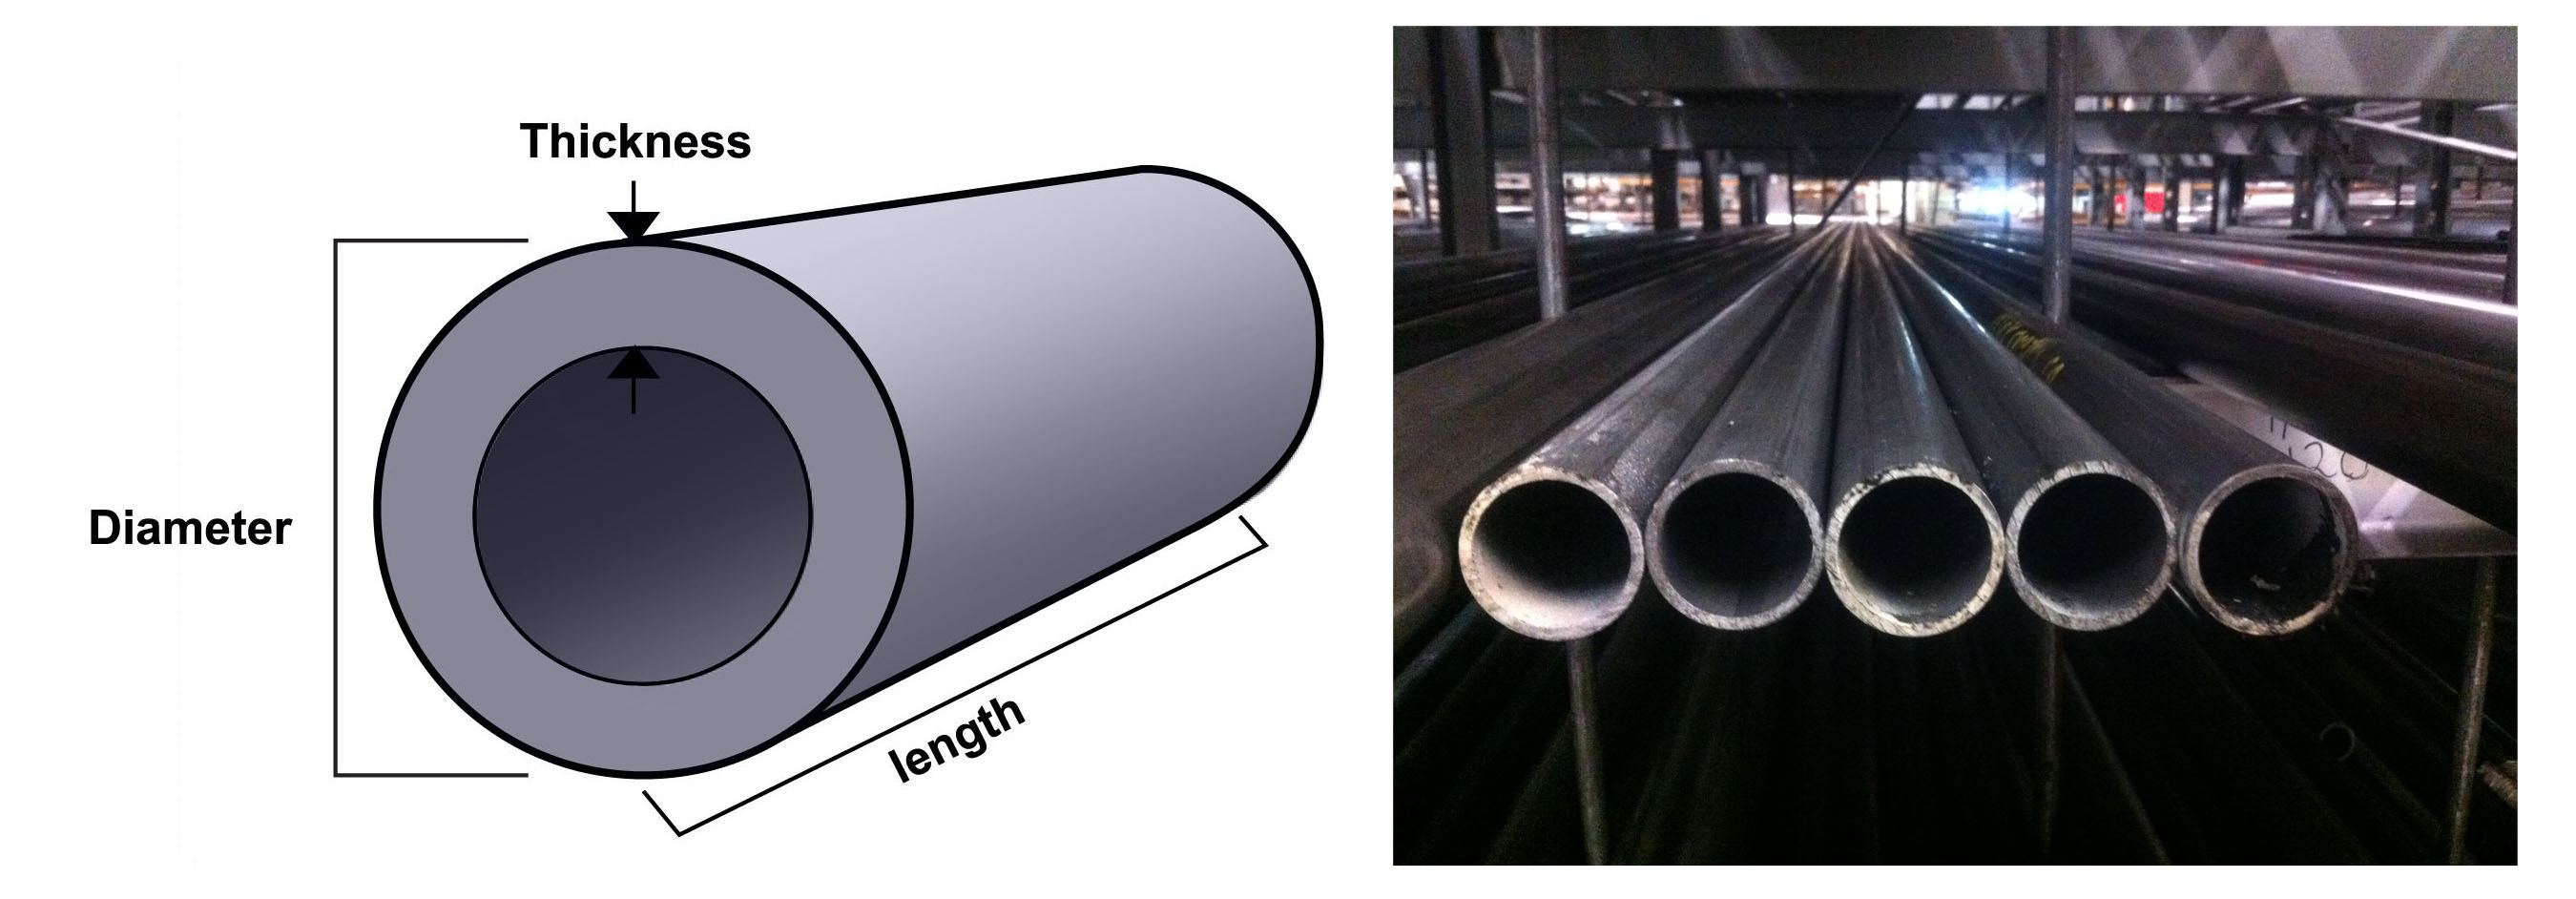 ALUMINIUM ROUND TUBE PIPE 60mm OD x 70mm LONG 2mm WALL THICK 